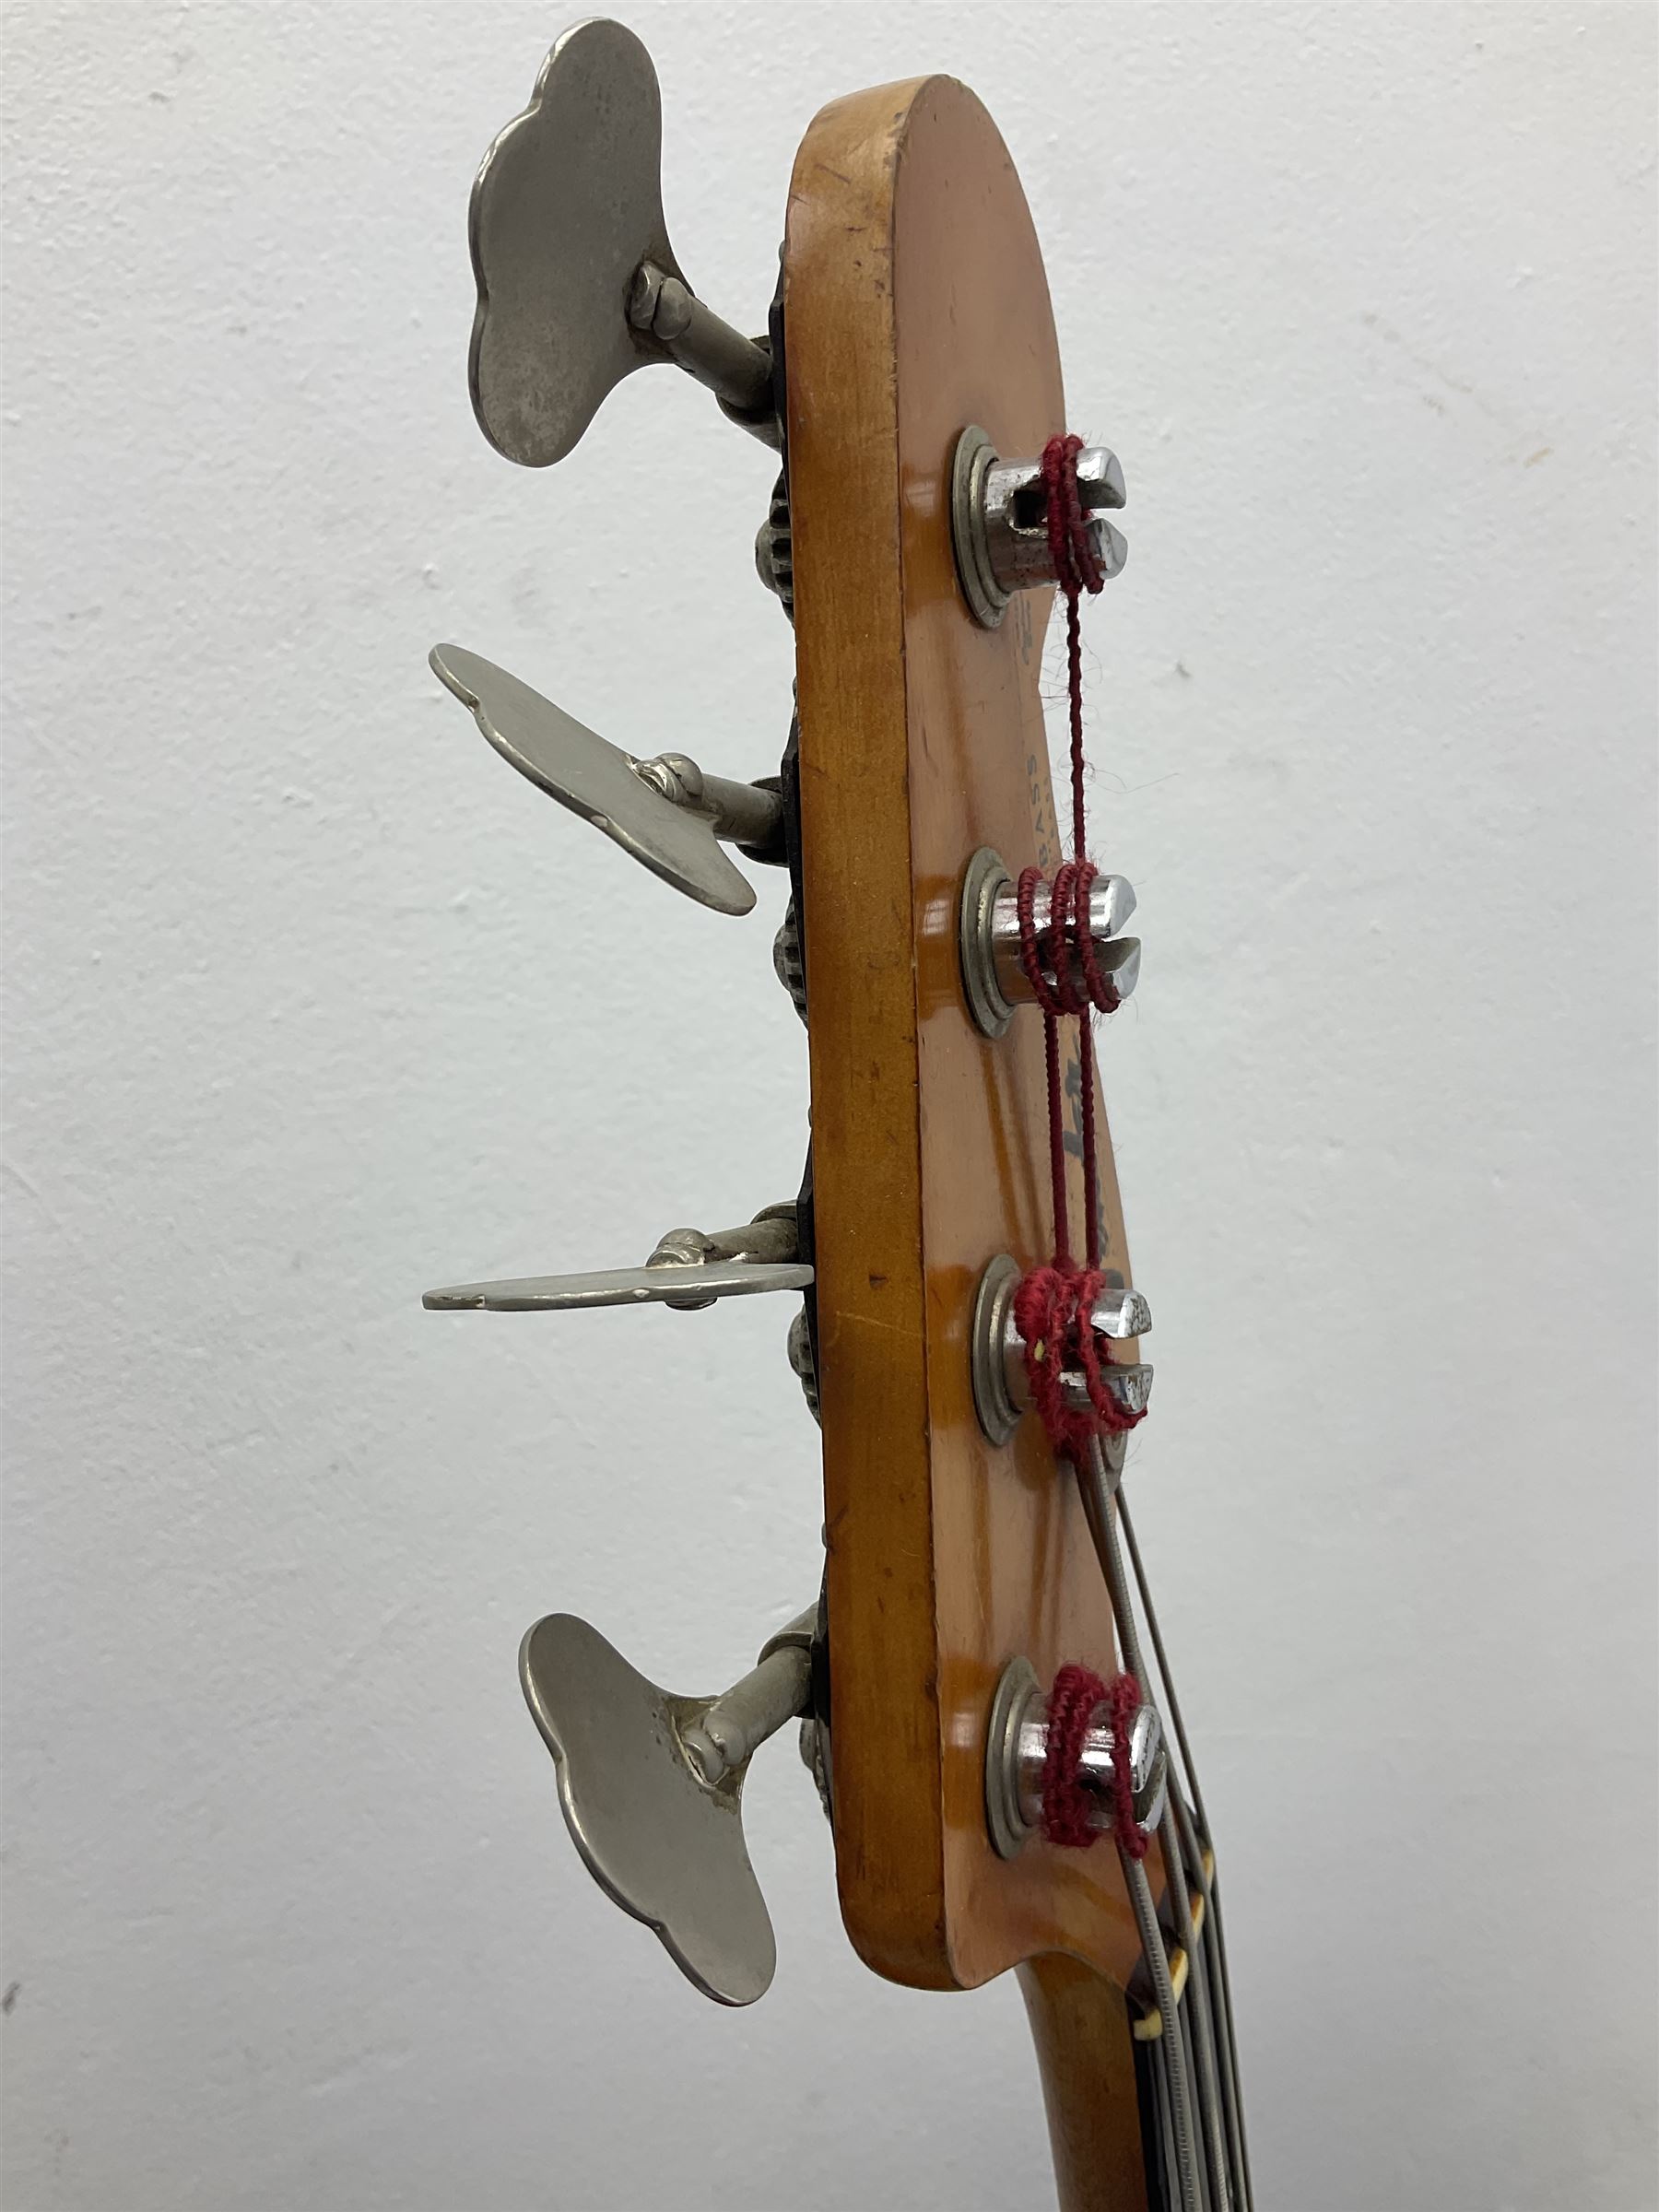 1963 Fender Jazz three-knob bass guitar; impressed with date code 7AUG63A on end of neck and serial - Image 11 of 22